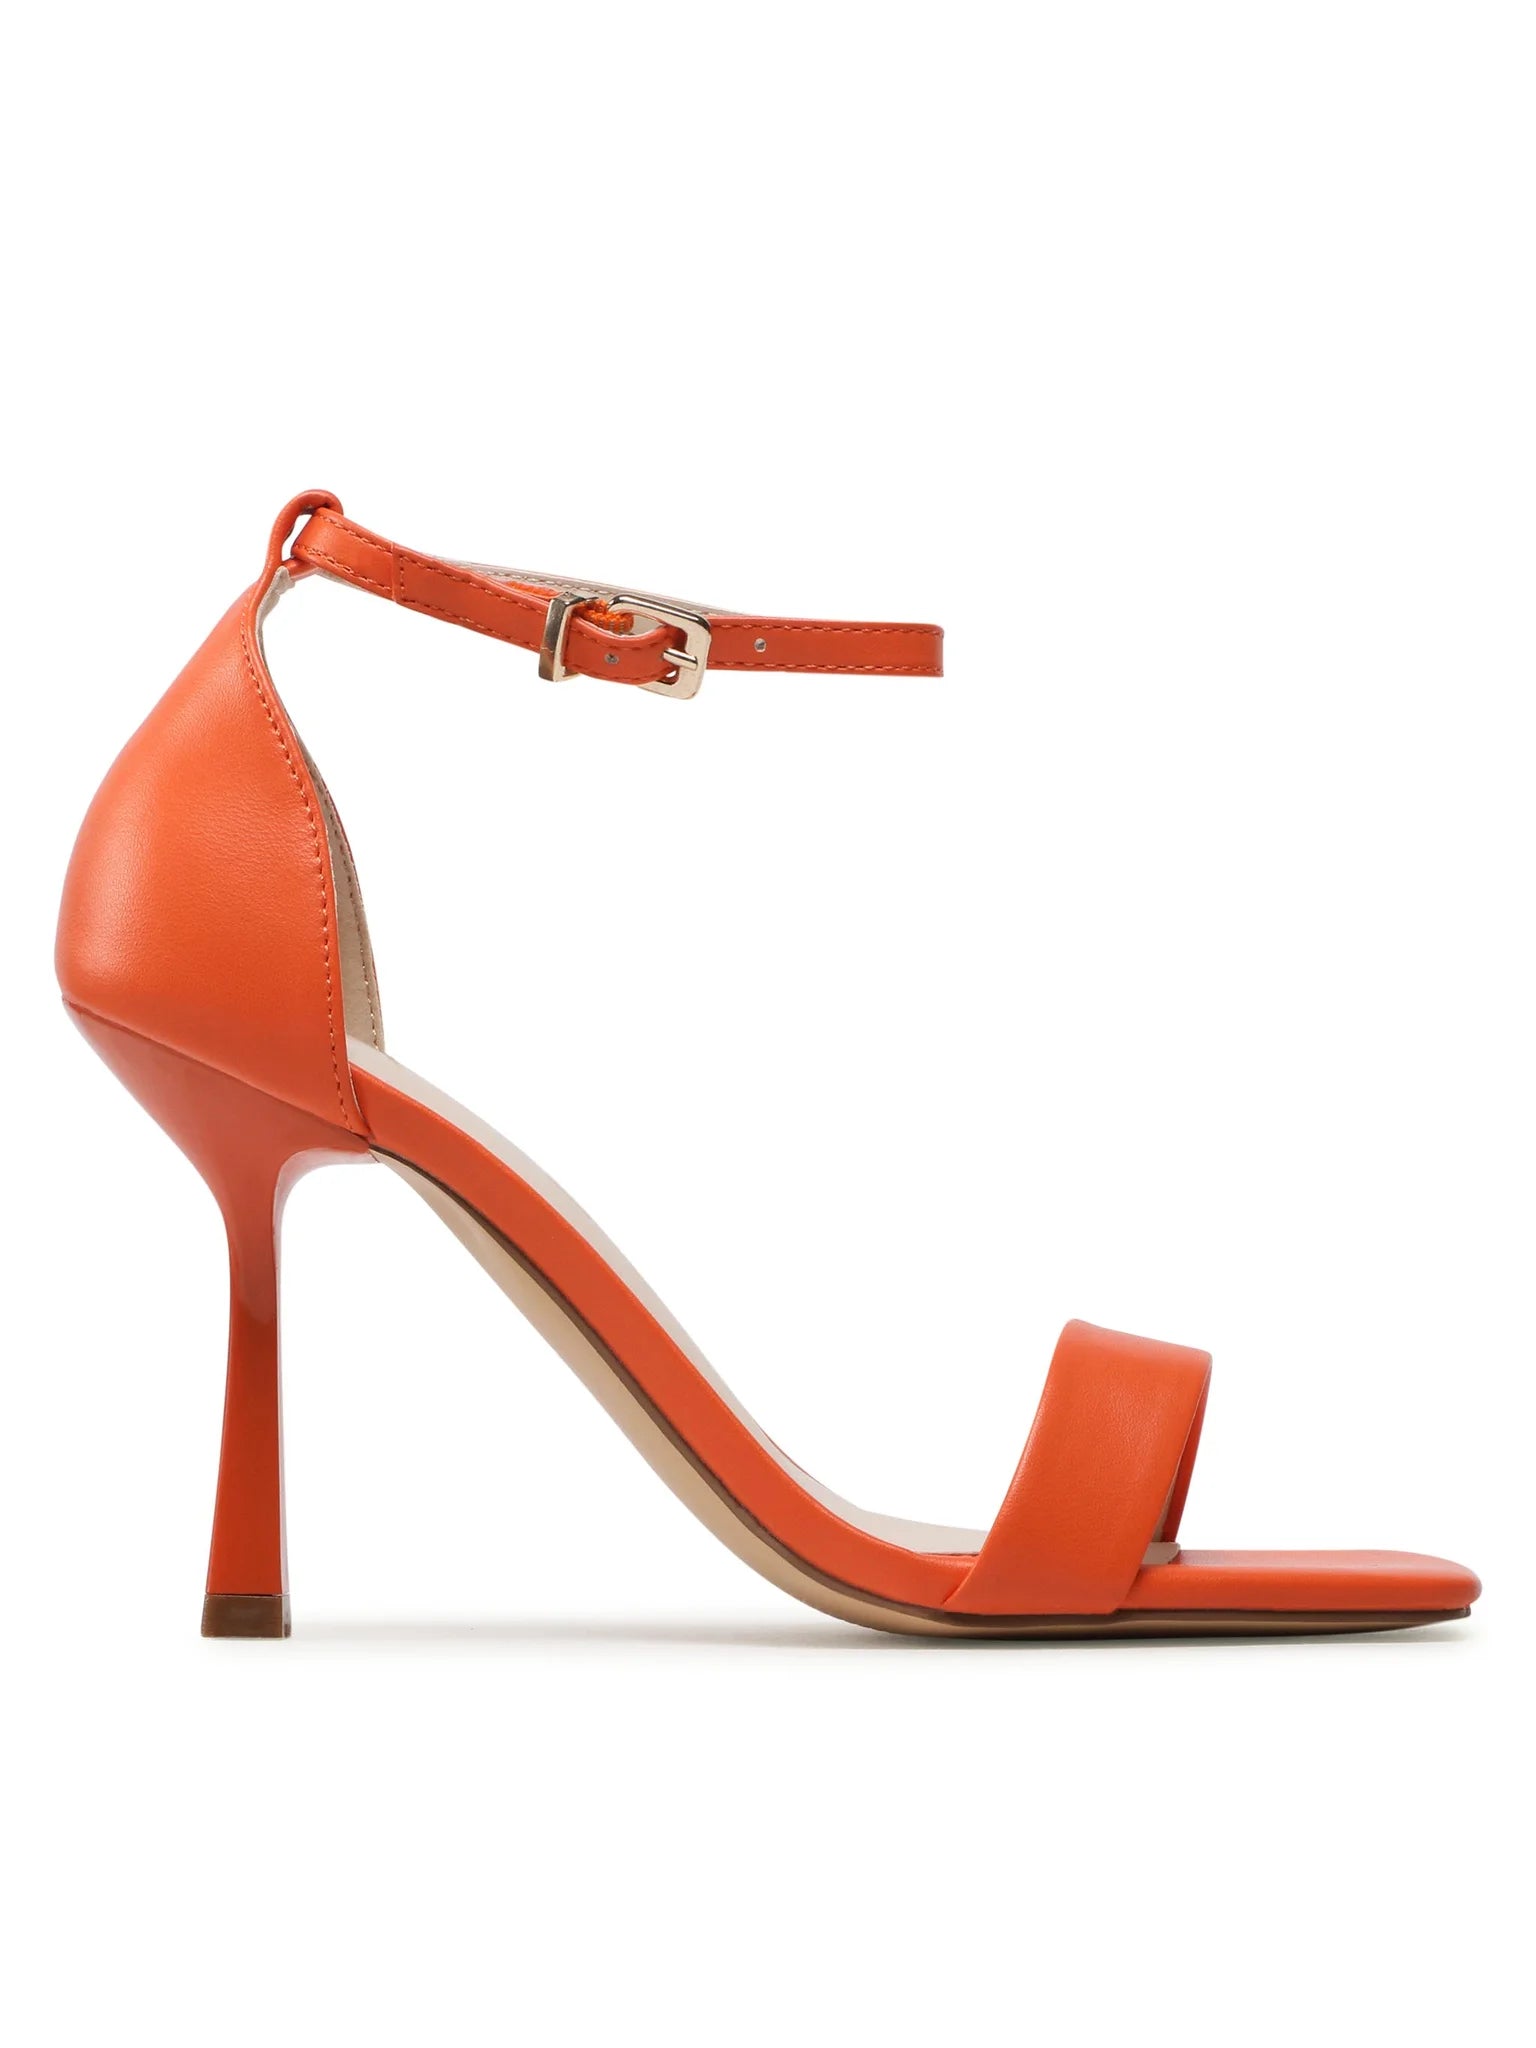 ONLY ORANGE BARELY THERE HEELED SANDAL